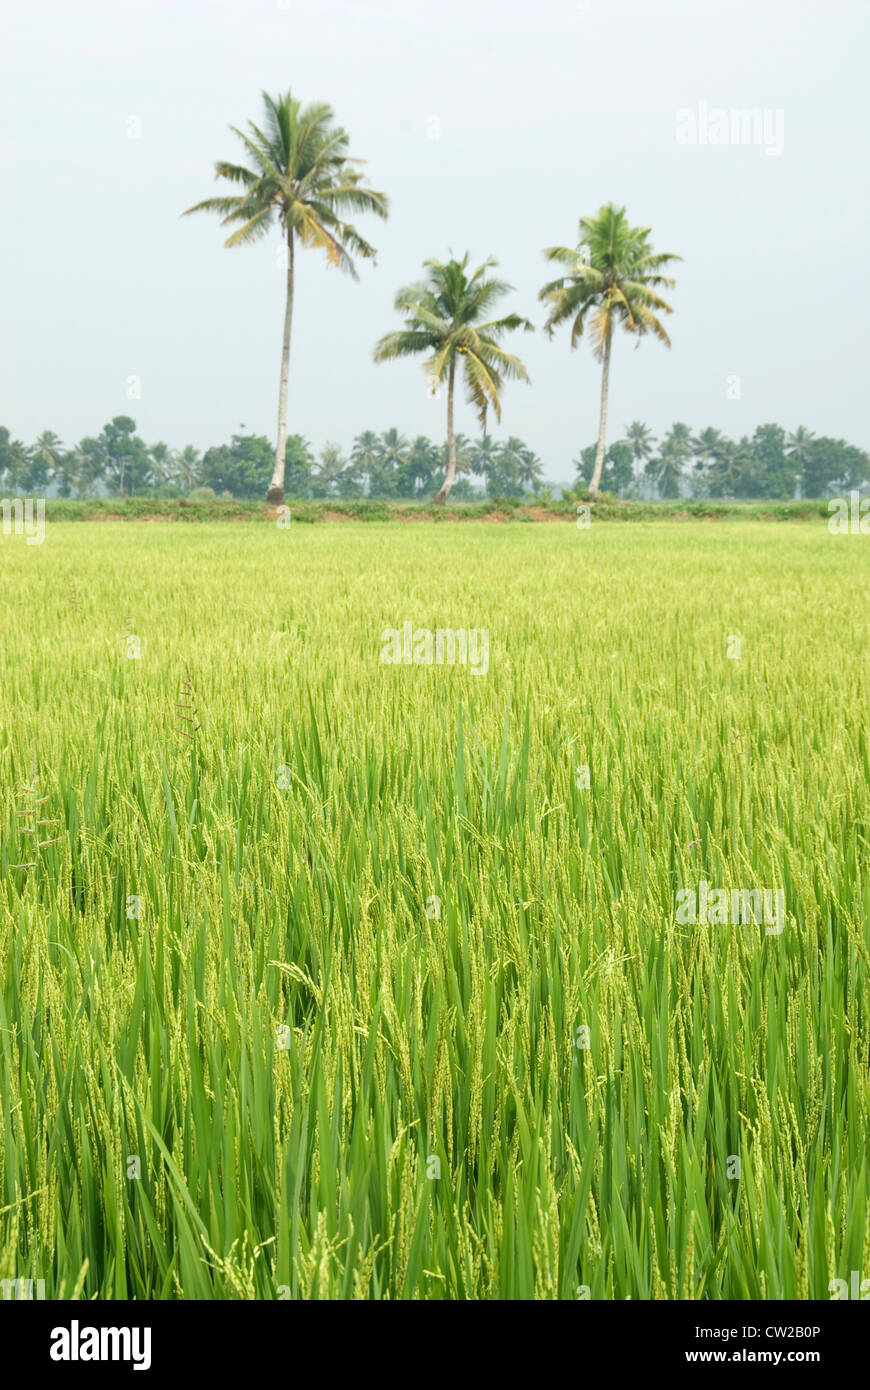 Paddy Field In Kerala With Coconut Trees In The Background Stock